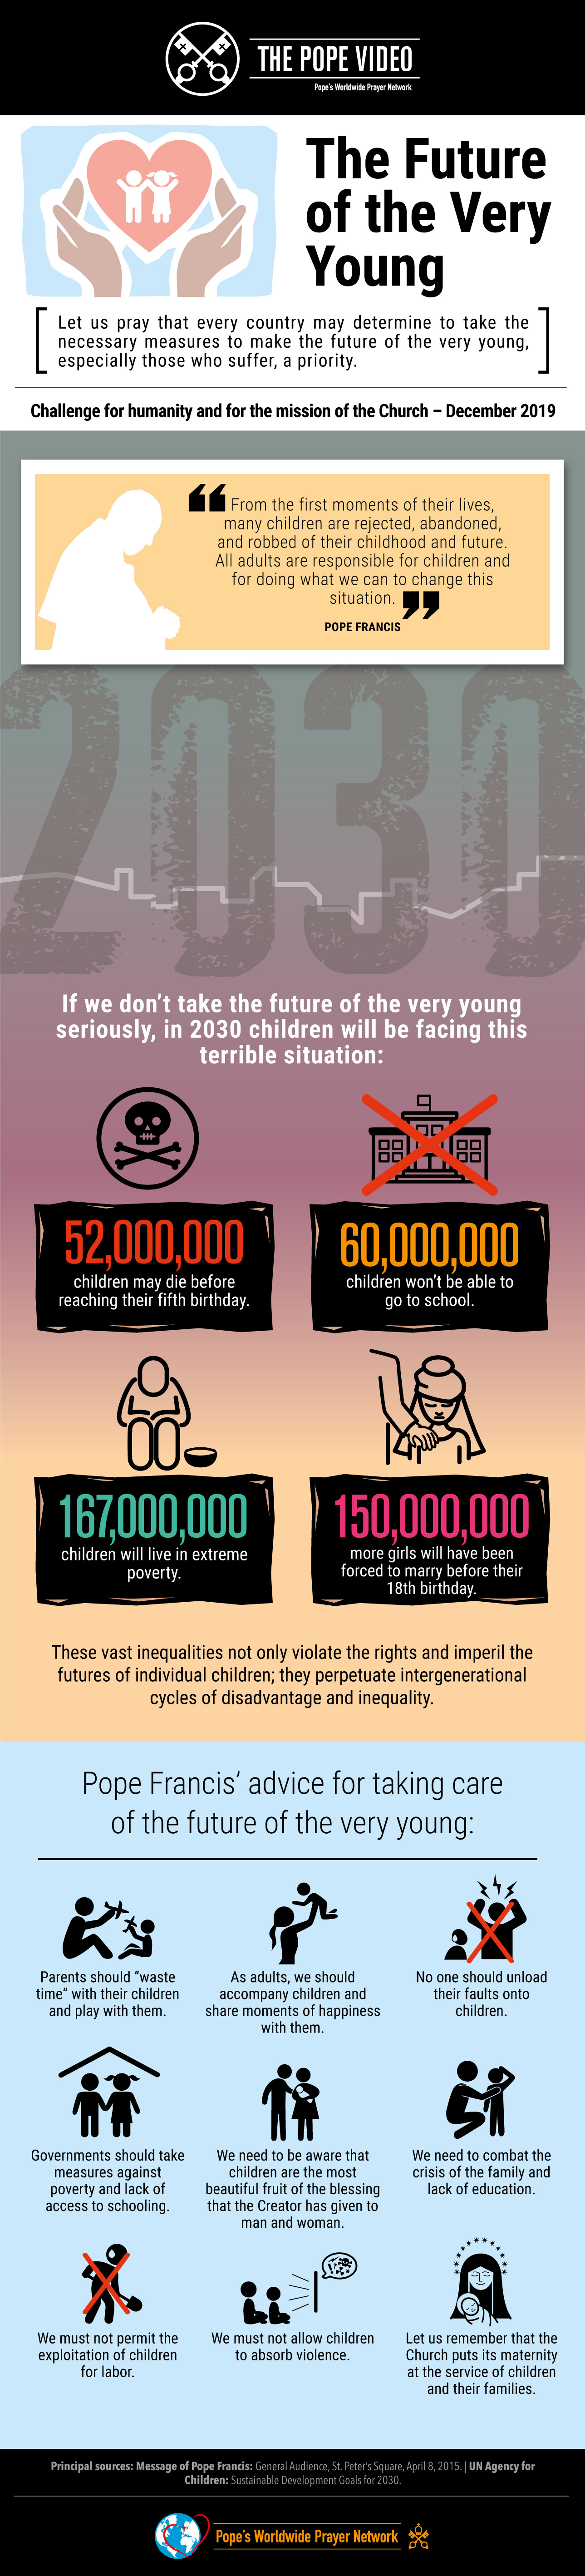 infographic-tpv-12-2019-en-the-pope-video-the-future-of-the-very-young.jpg